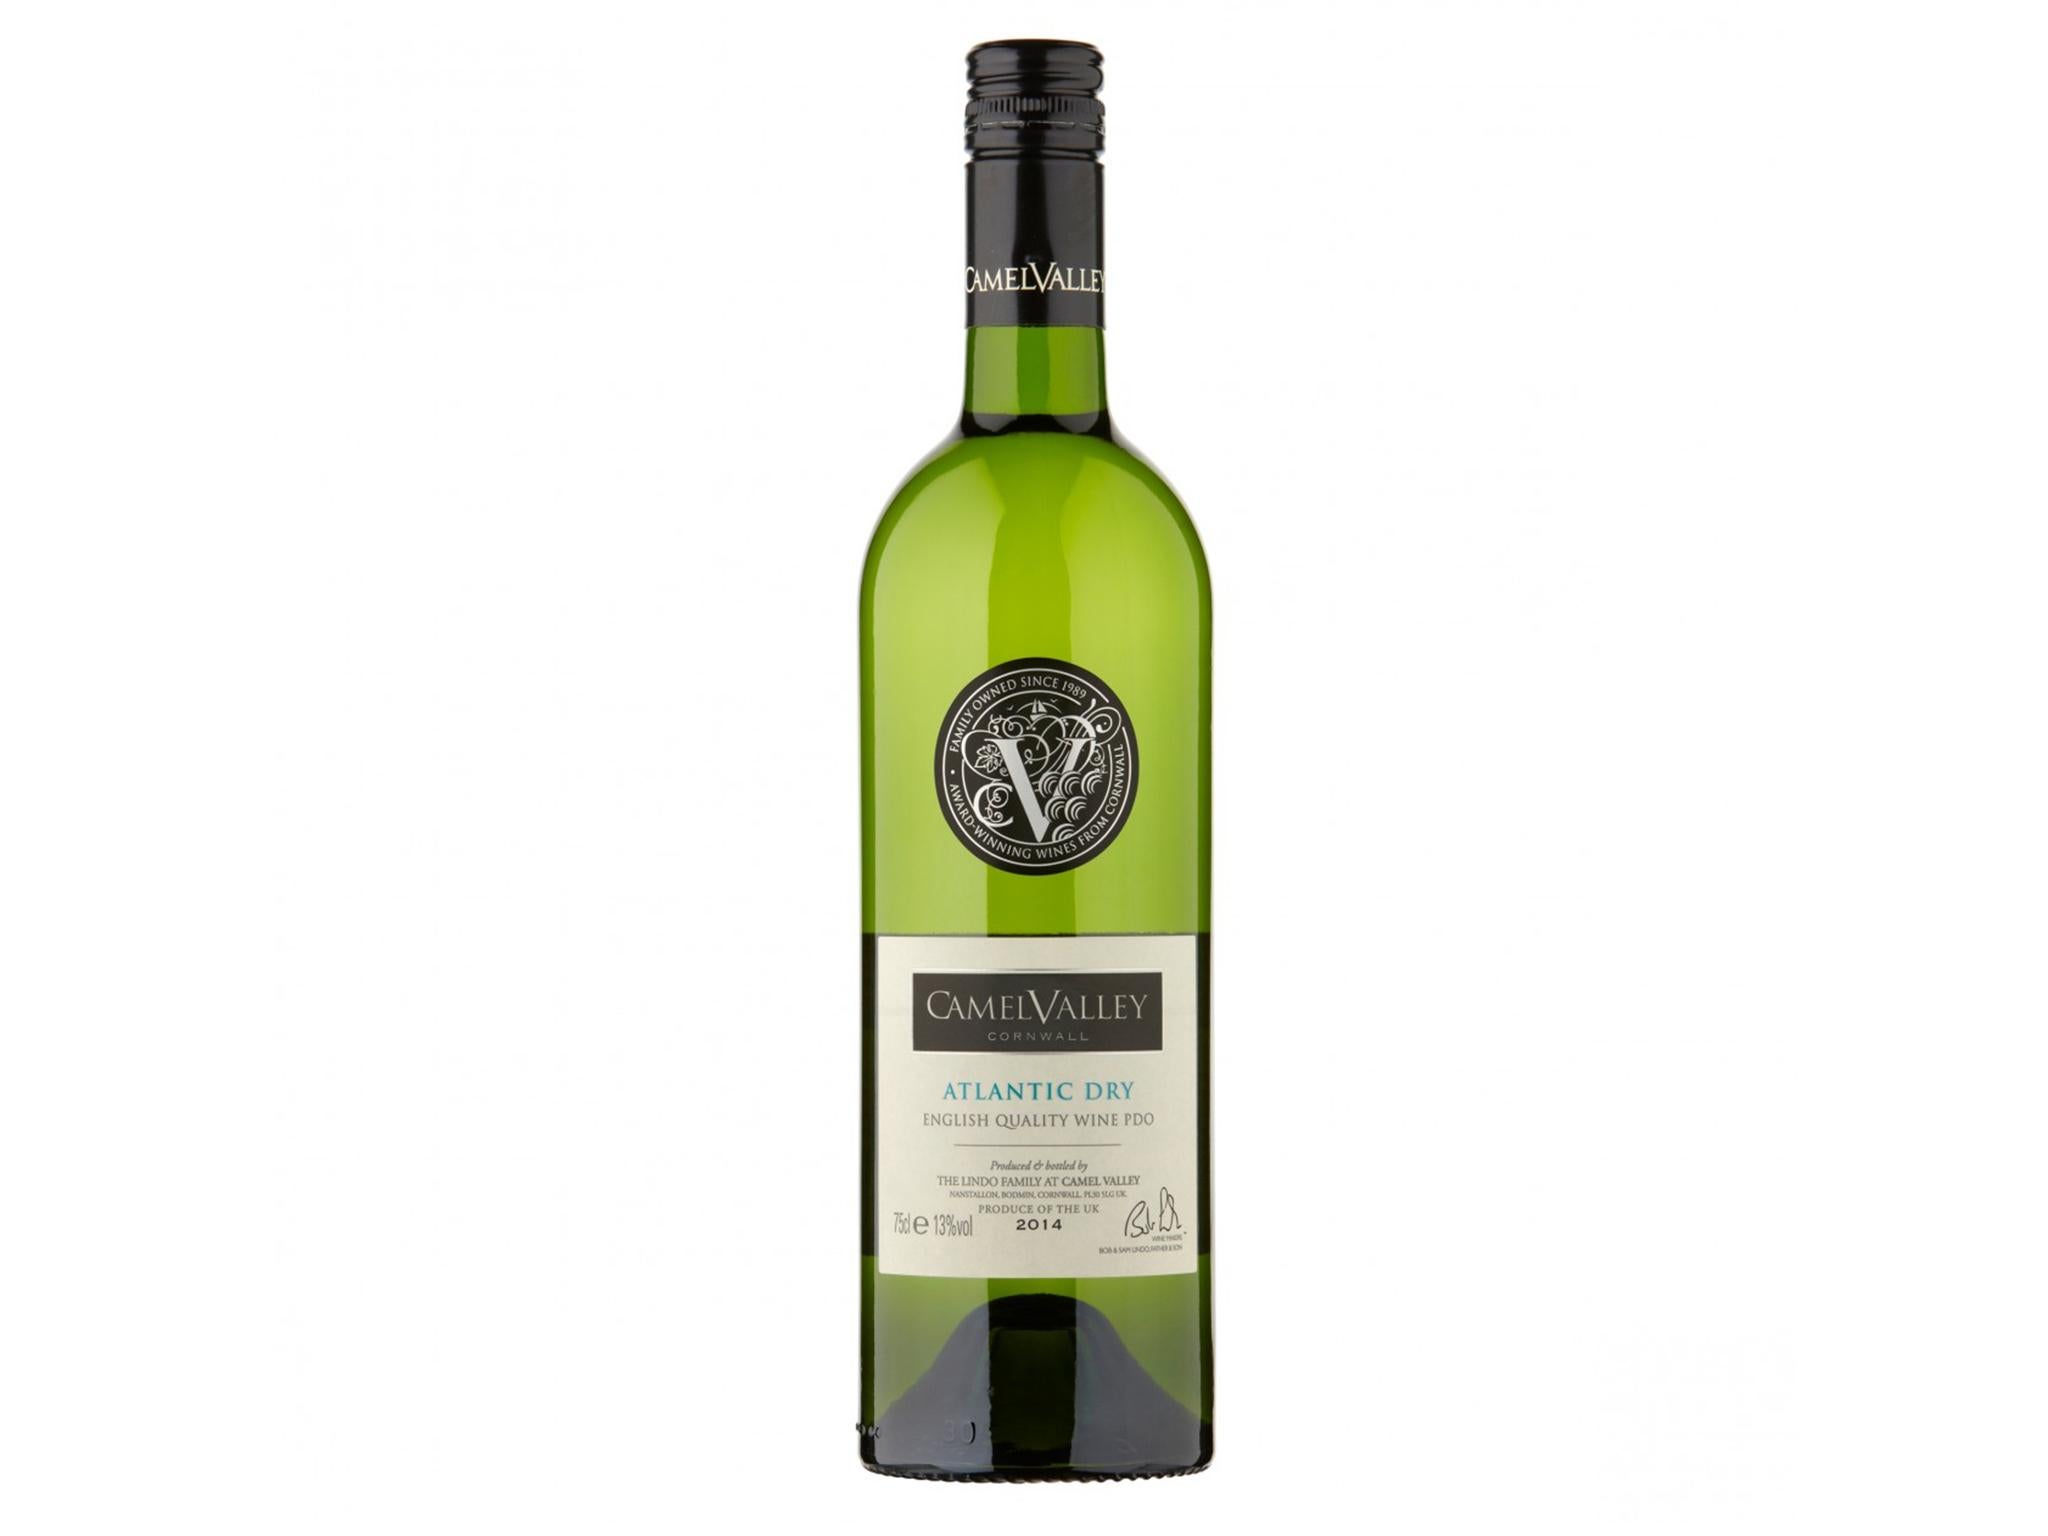 If you like citrus flavours, you’ll love this white wine from the Cornish vineyard (Camel Valley)